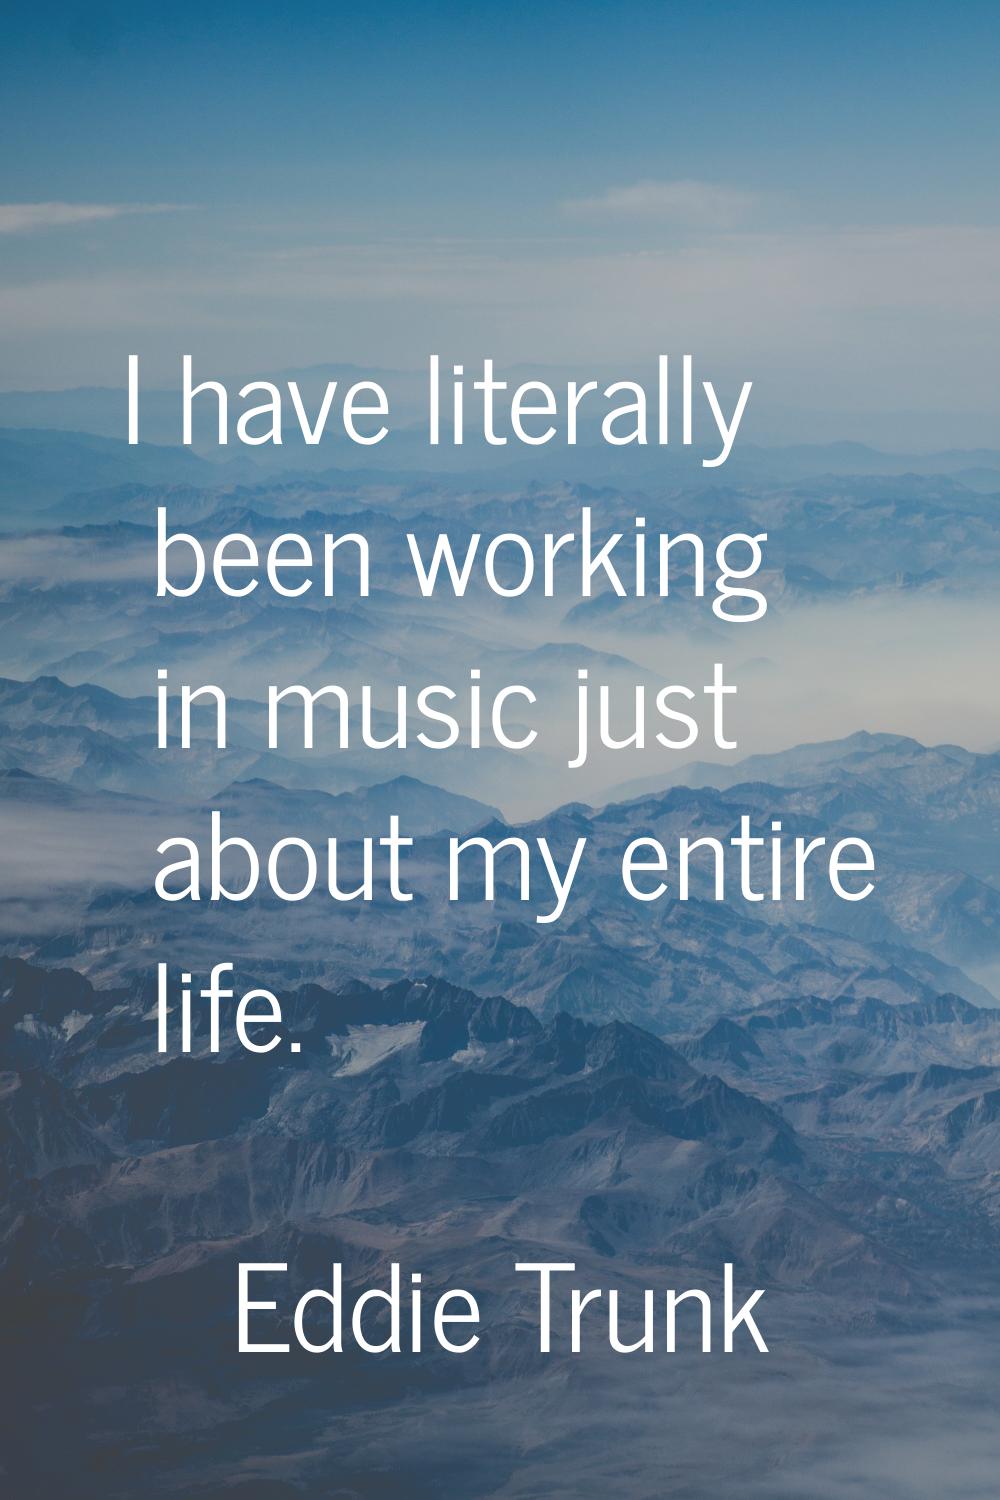 I have literally been working in music just about my entire life.